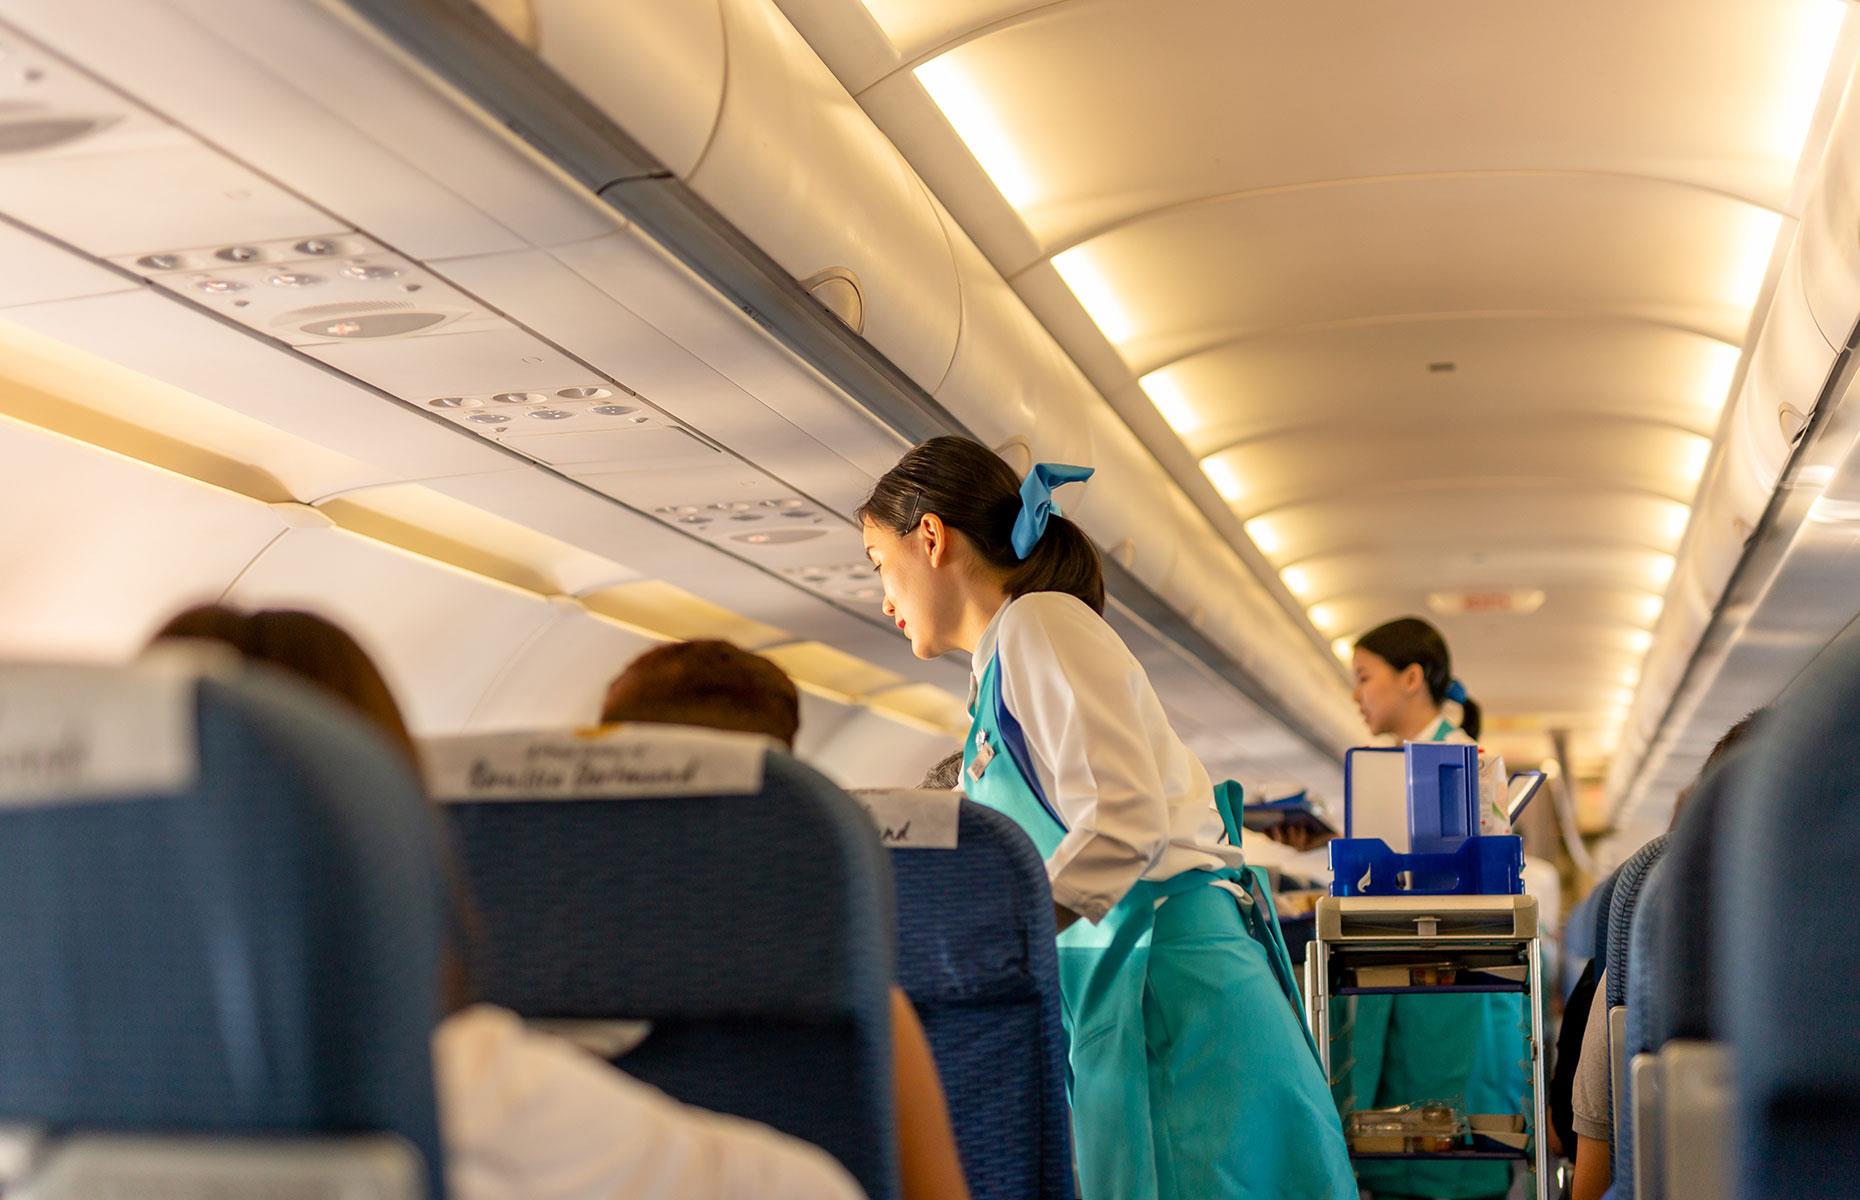 <p>Bangkok Airways comprises a 30-strong fleet, with each aircraft decorated in their own liveries representing the destinations they fly to. The company's latest generation aircraft, the ATR72-600, includes a full-glass cockpit and larger overhead bins. </p>